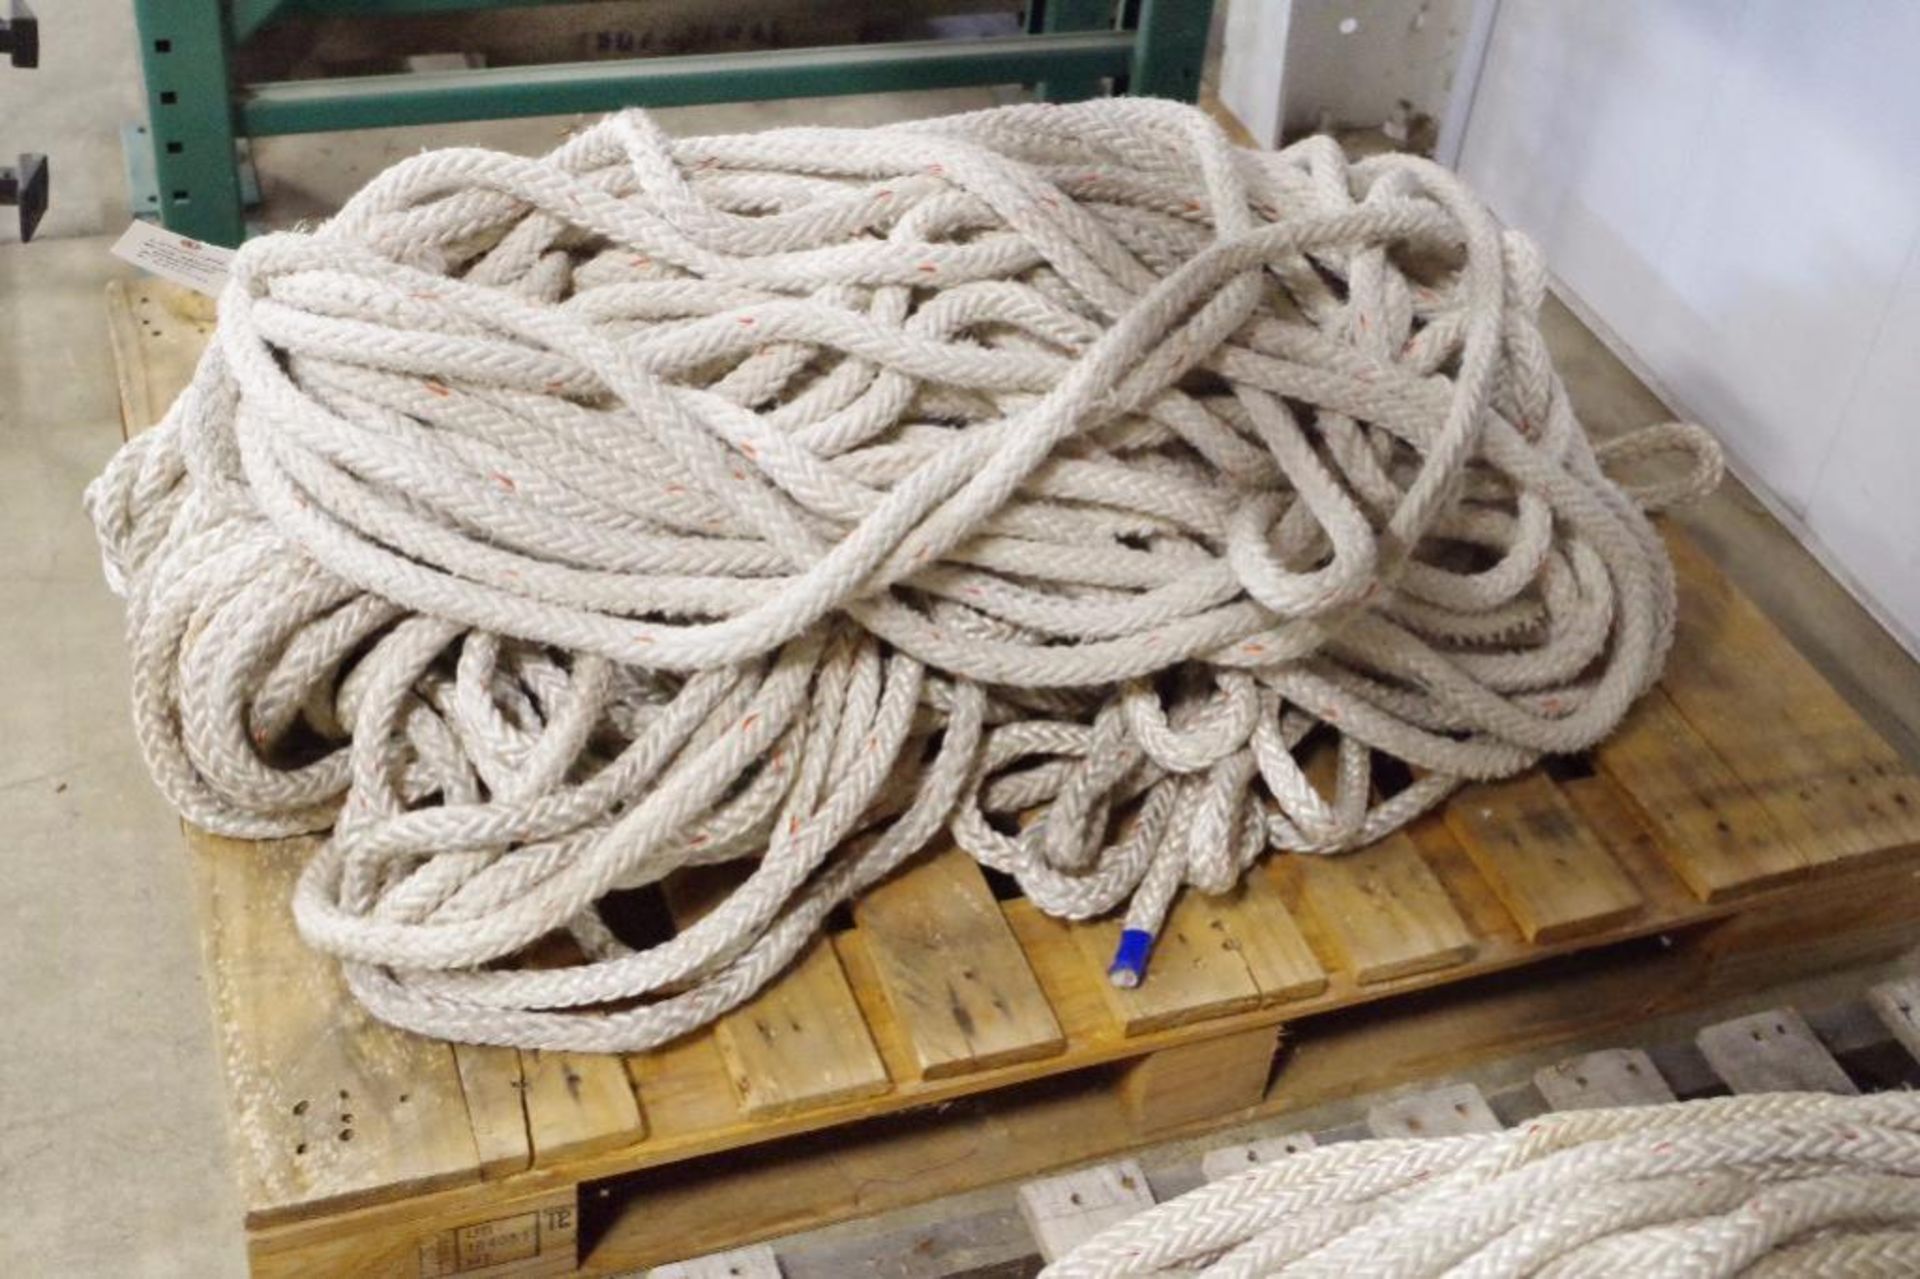 [QTY] Rope, 3/4" or 7/8", At least two sections of rope - Image 3 of 3